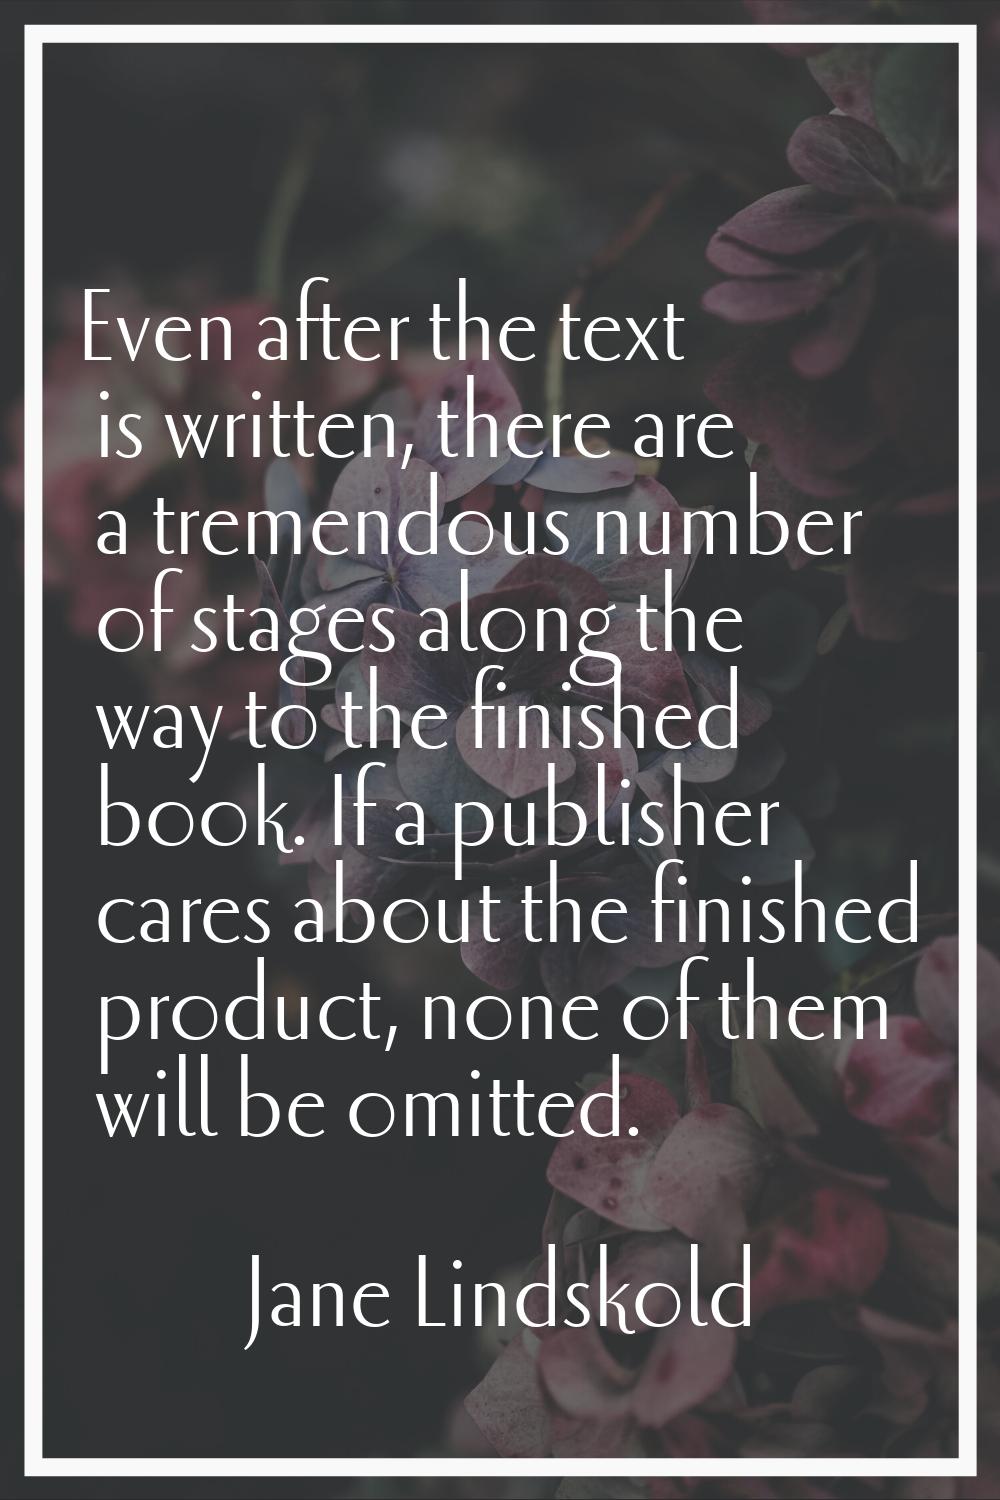 Even after the text is written, there are a tremendous number of stages along the way to the finish